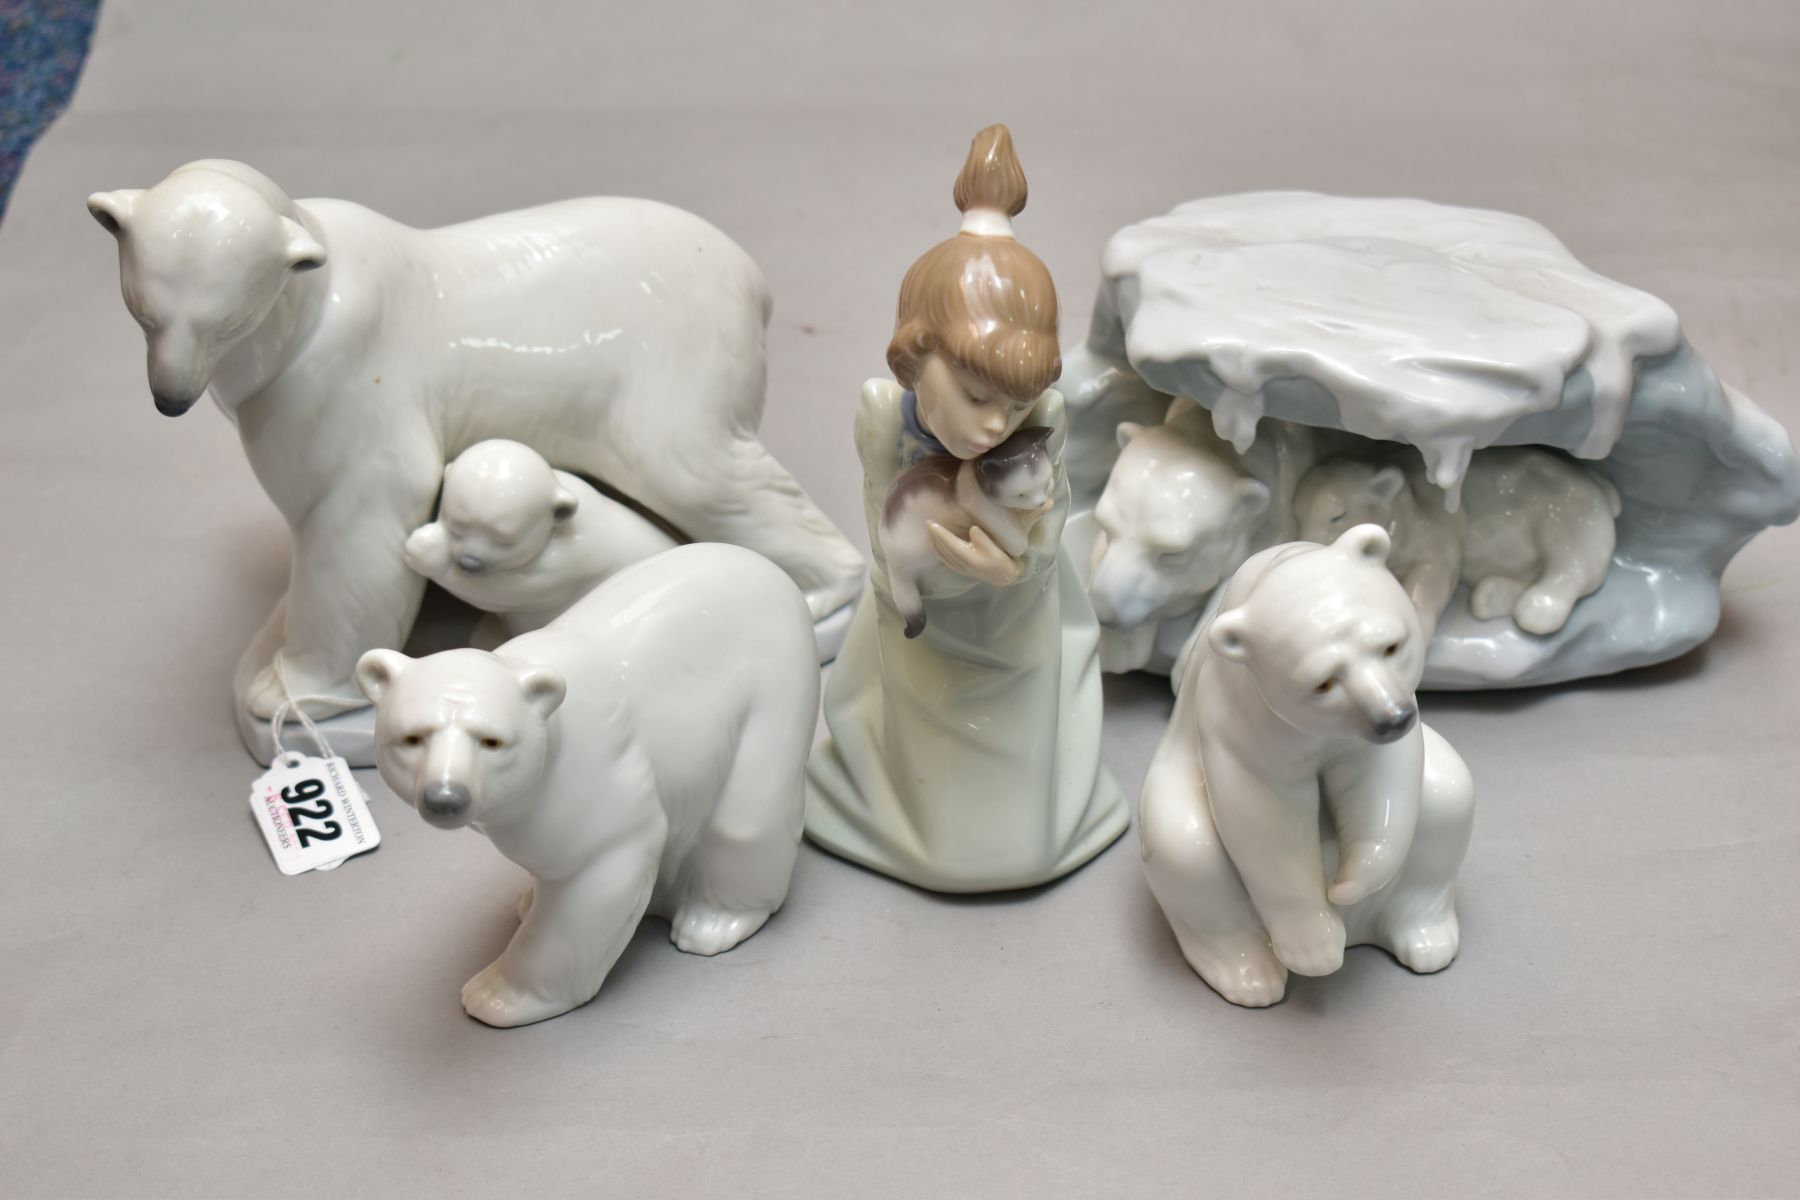 FOUR LLADRO POLAR BEAR FIGURES/GROUPS AND ANOTHER, comprising 8062 'A Snowy Sanctuary', 6745 'Arctic